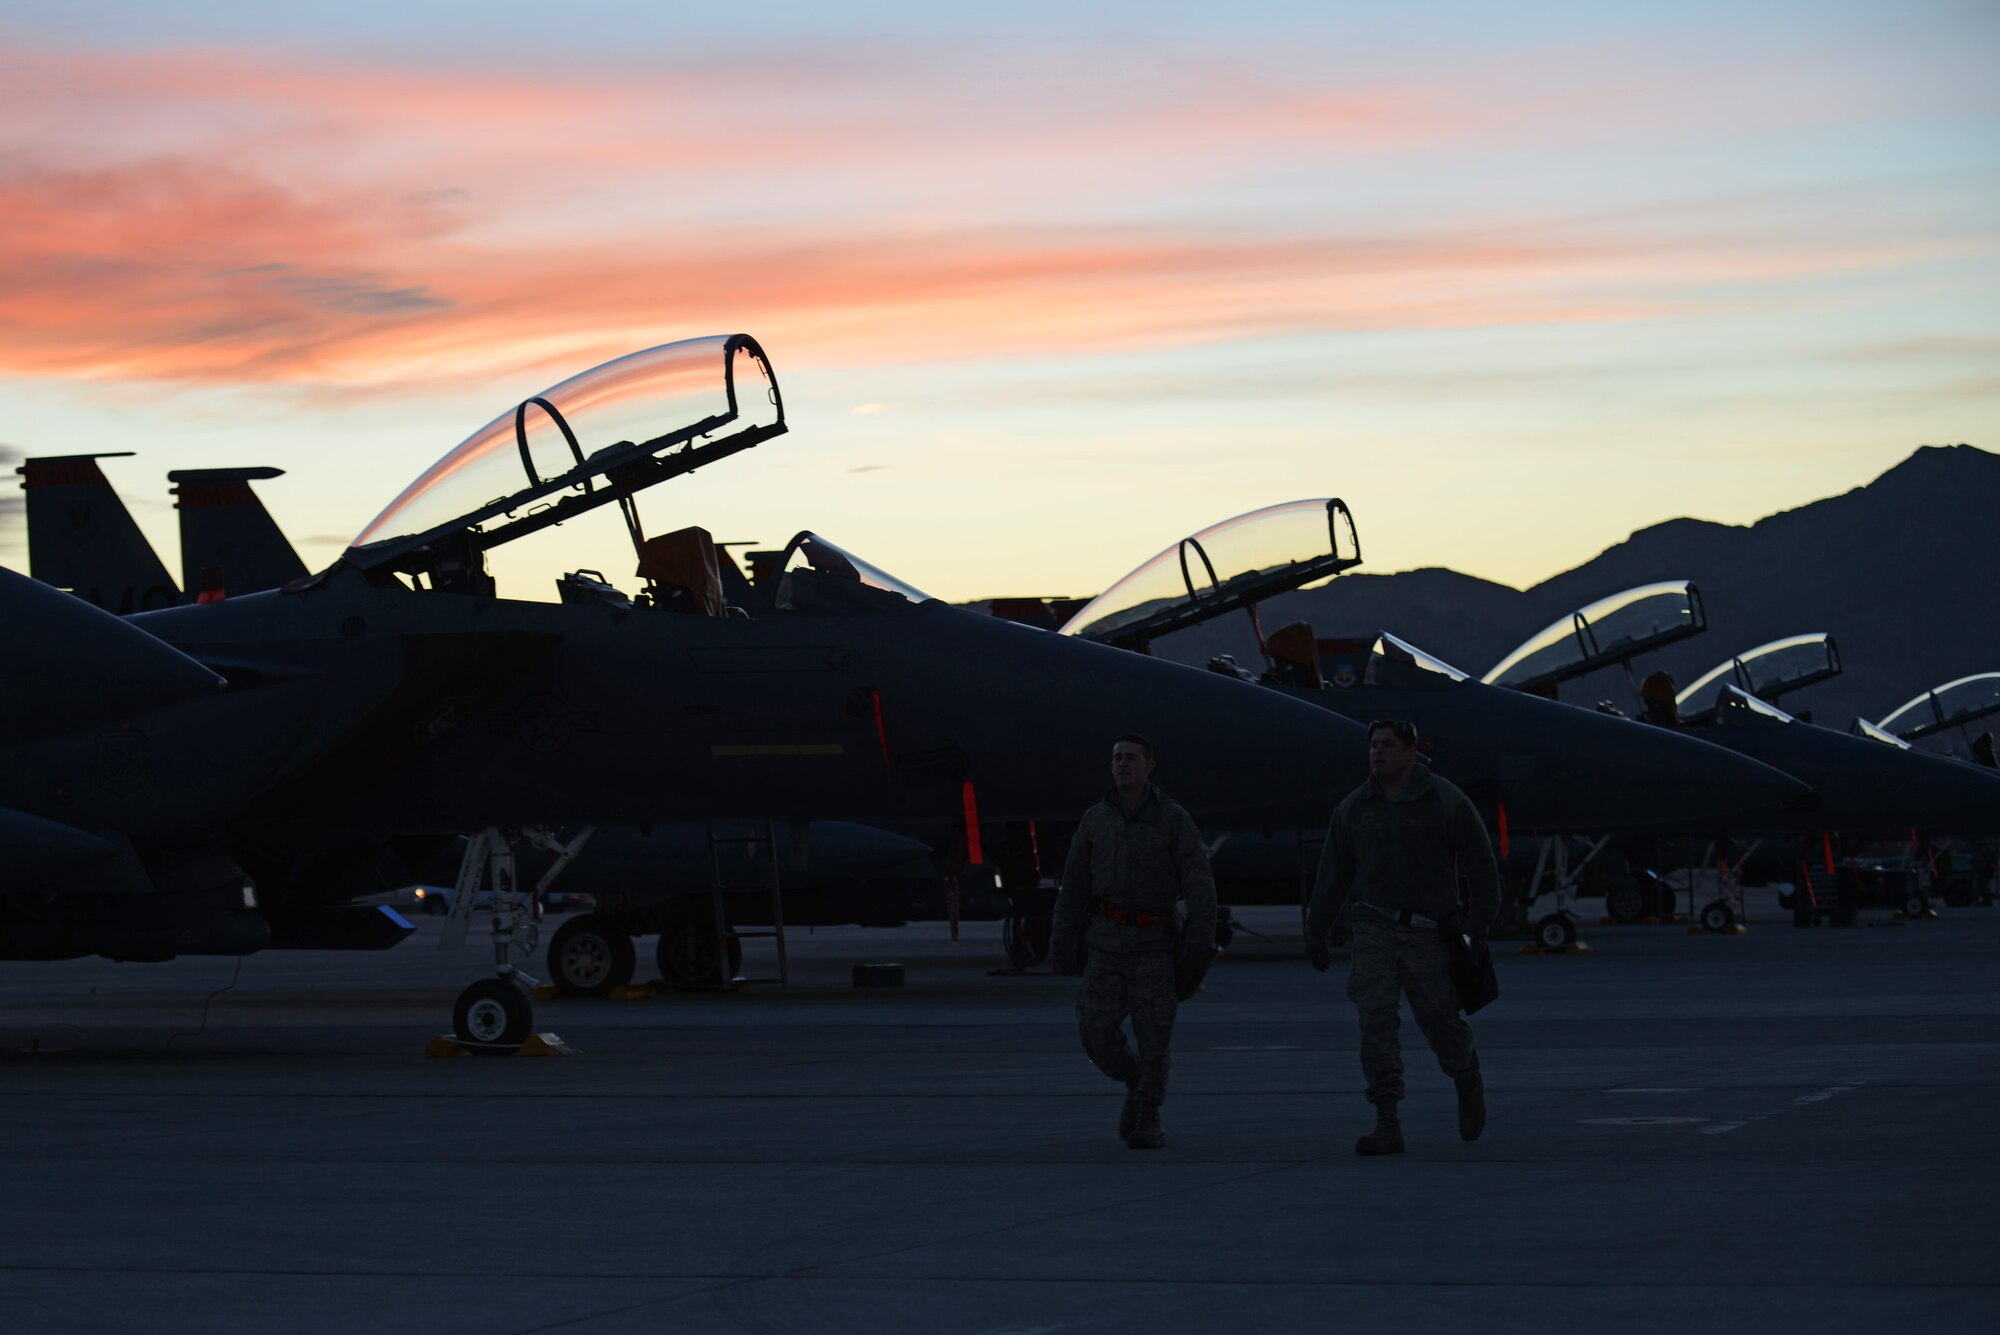 Senior Airman Cameron Delsol, 366th Aircraft Maintenance Squadron lead crew three man and Staff Sgt. Douglas Brown, 366th AMXS lead crew team chief, walk along the flight line at Nellis Air Force Base, Nev., Jan. 28, 2014. The Airmen are more than 3,200 personnel participating in Red Flag 14-1. The premier exercise gives them the opportunity to experience realistic, stressful combat situations in a controlled environment to increase their ability to complete missions and return home. (U.S. Air Force photo by Senior Airman Benjamin Sutton/Released) 